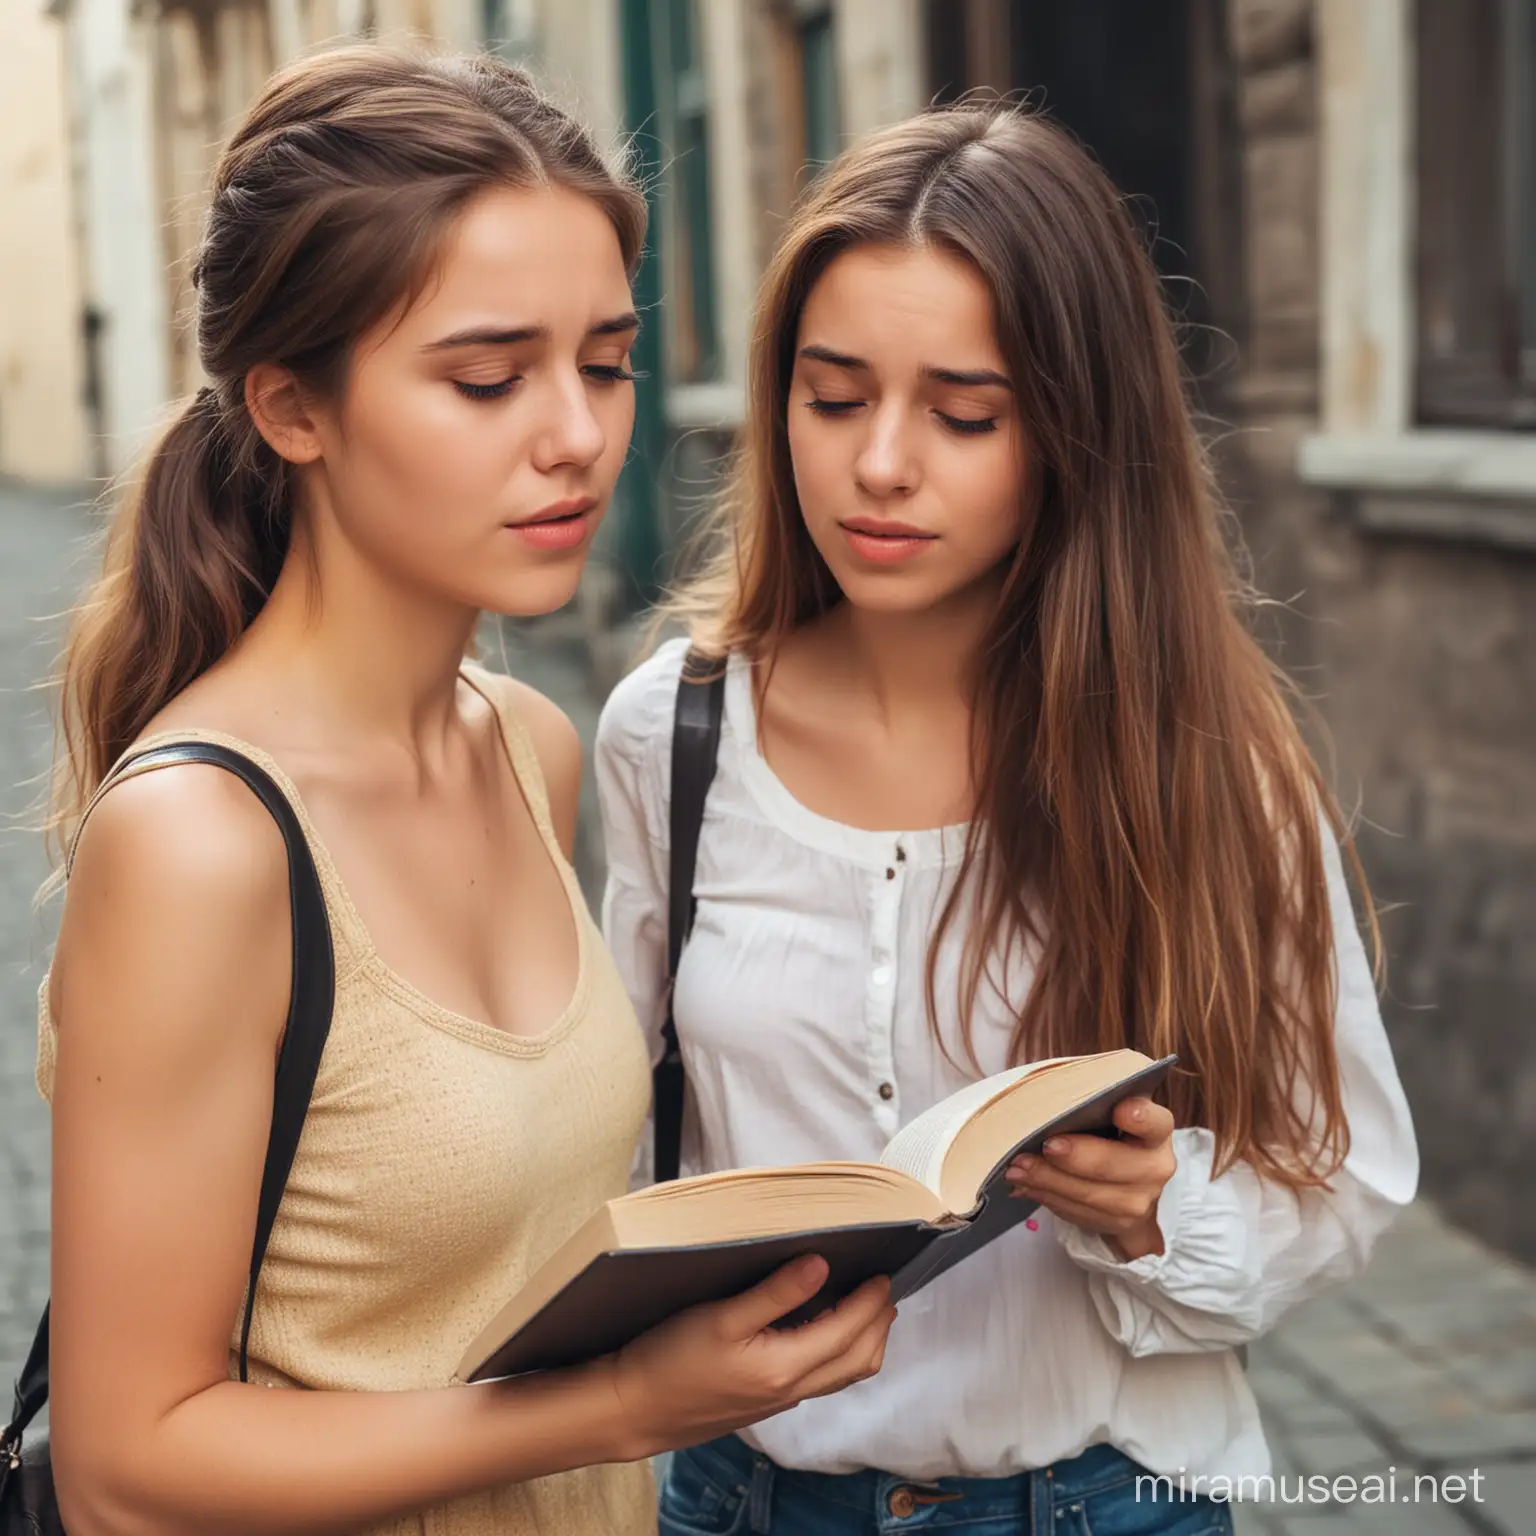 very kind and beutiful girl with a book in her hand talking to her friend, looking abit sad as if complaining,  seems to have failed the course